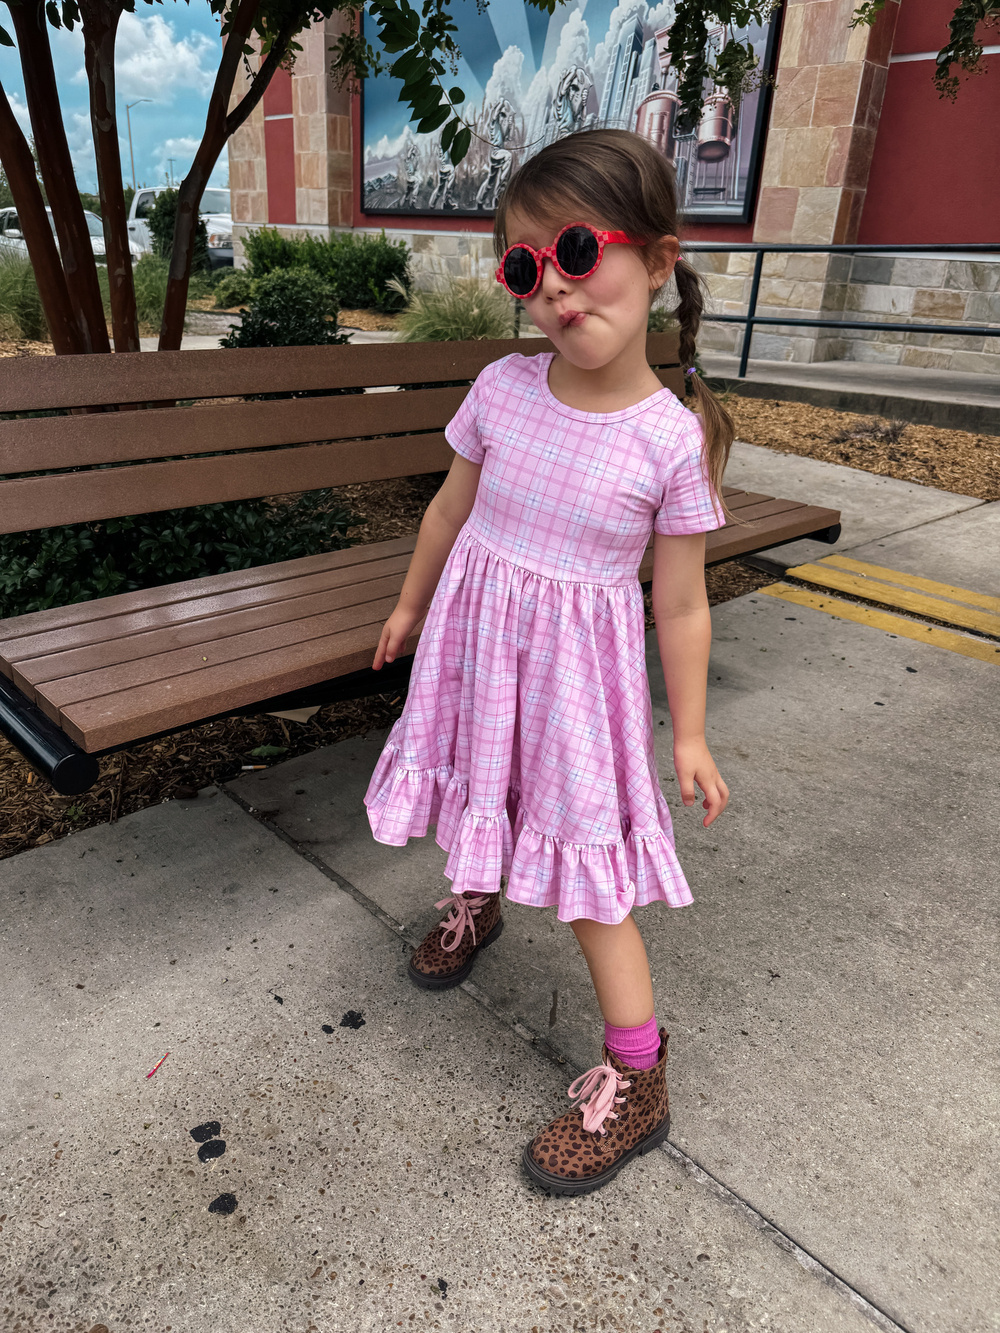 A girl in a pink dress and sunglasses